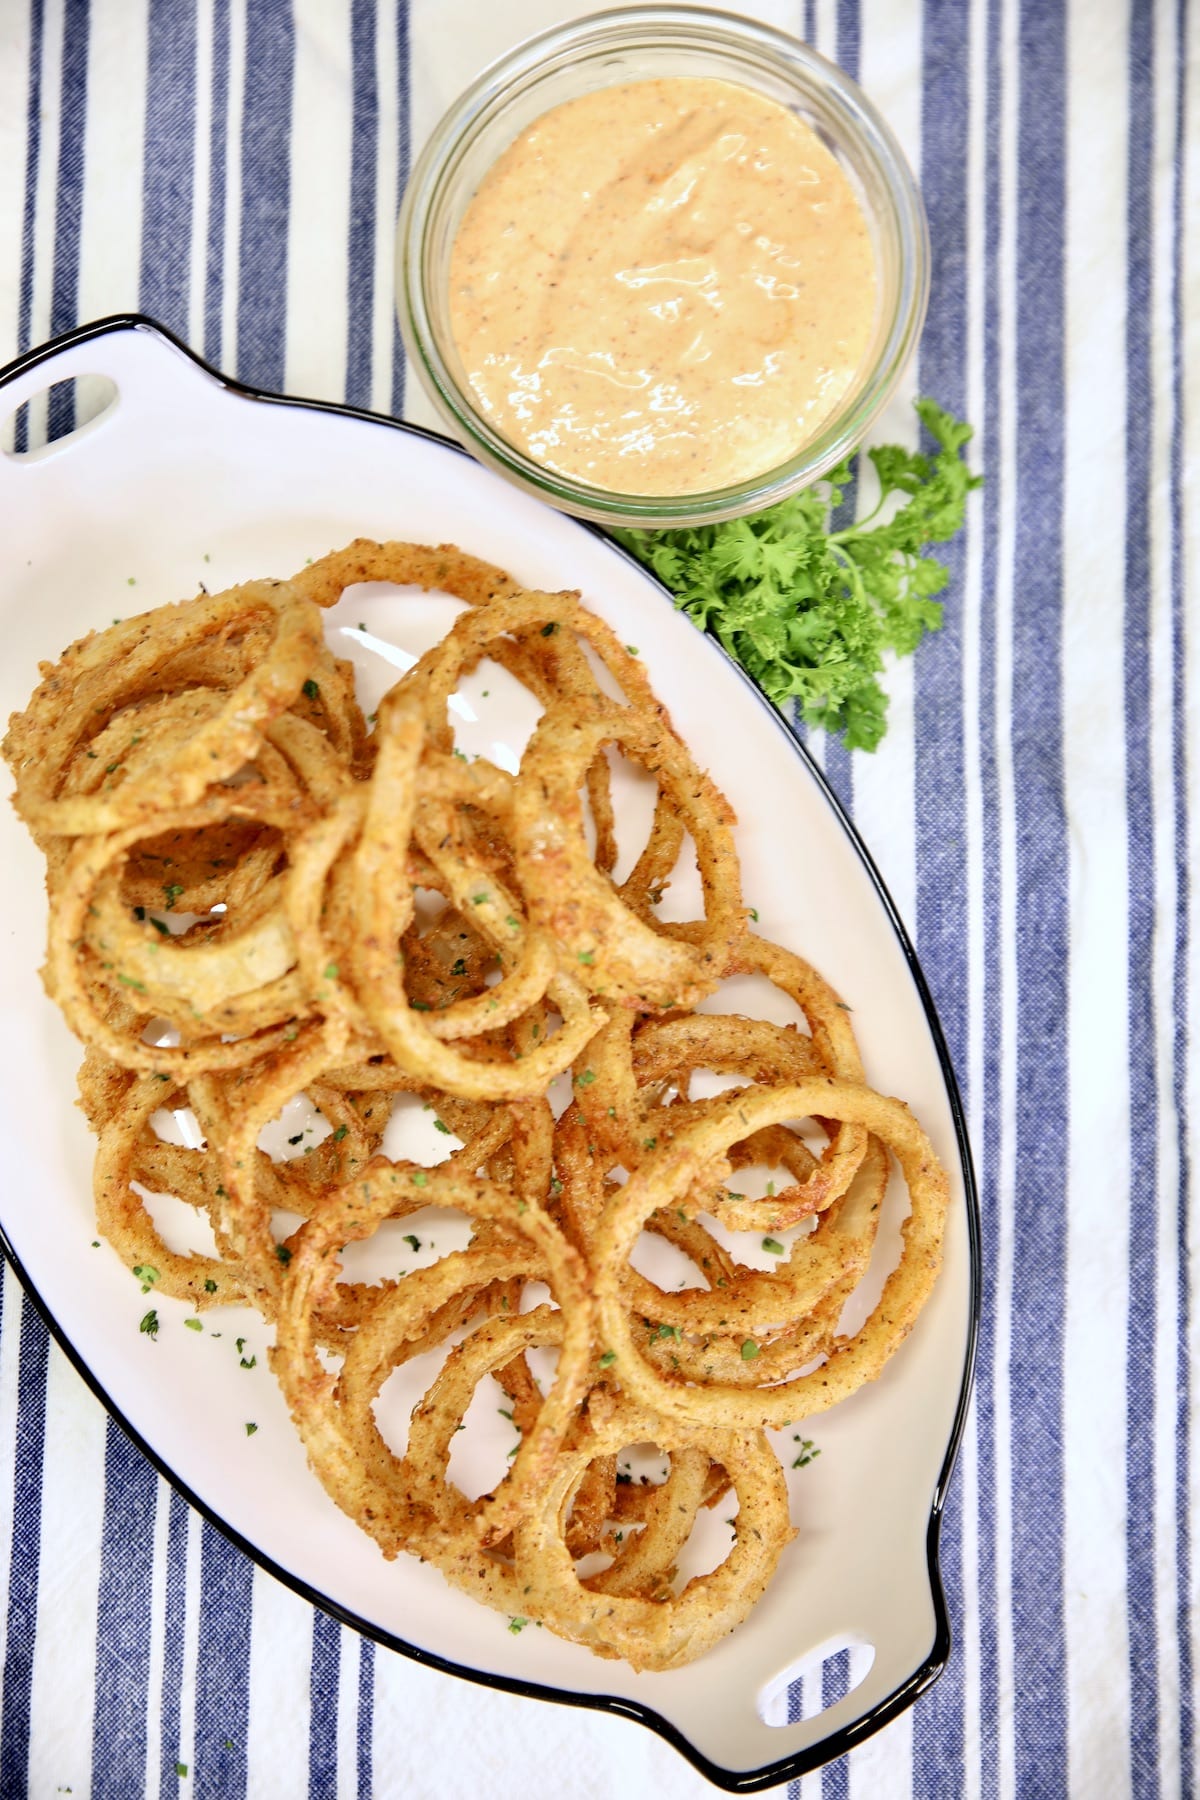 Platter of onion rings with dipping sauce.